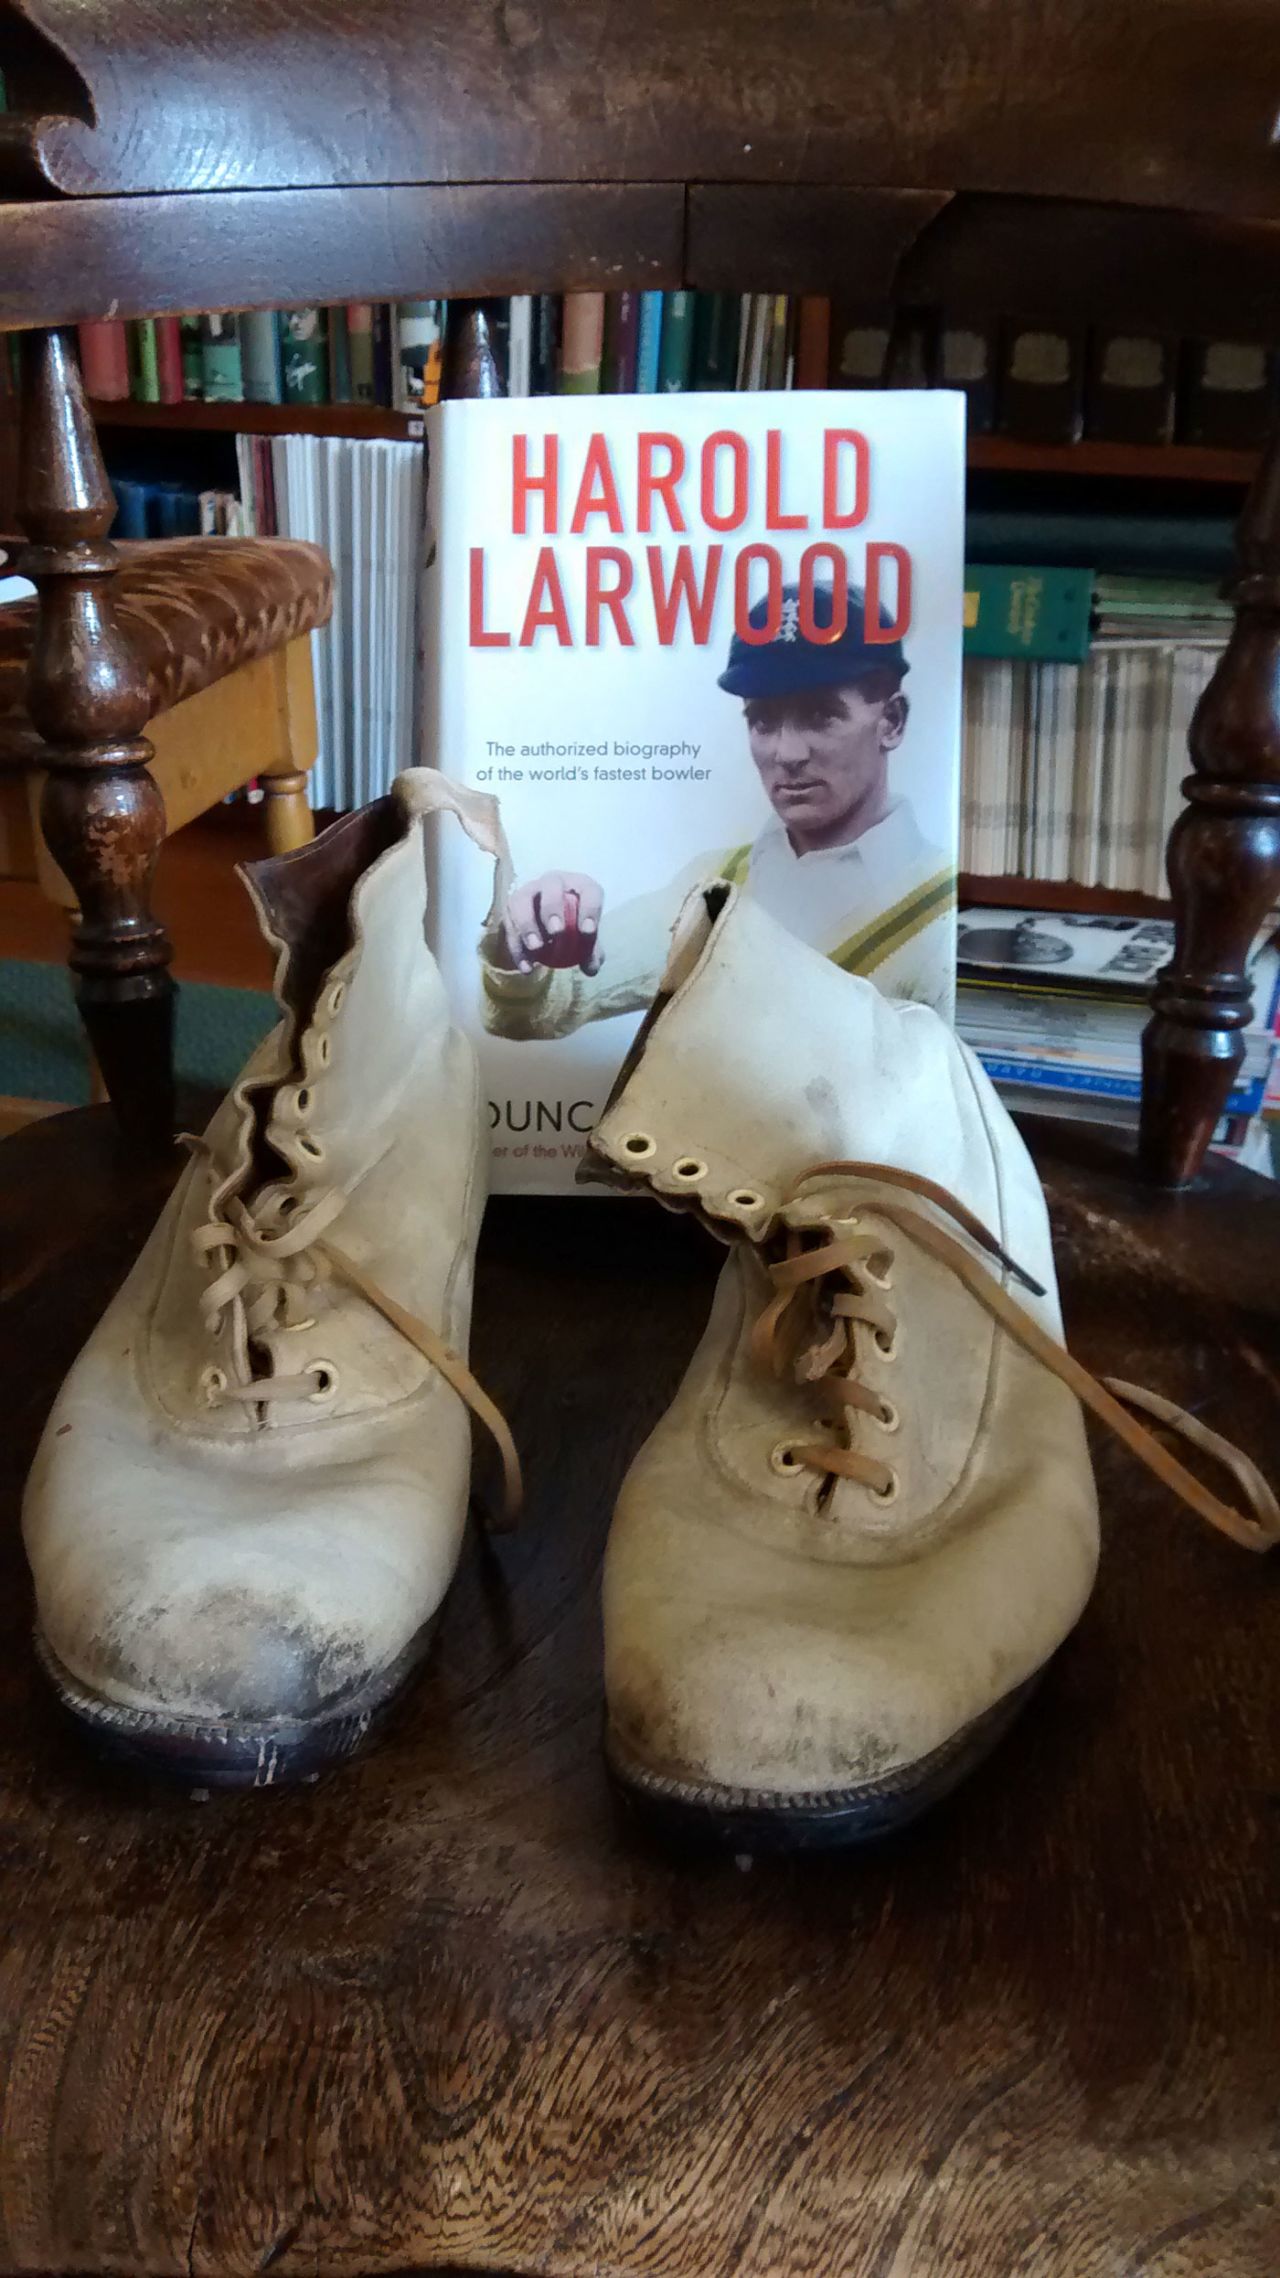 Harold Larwood's bowling boots and his biography by Duncan Hamilton at the Trent Bridge library, July 6, 2014